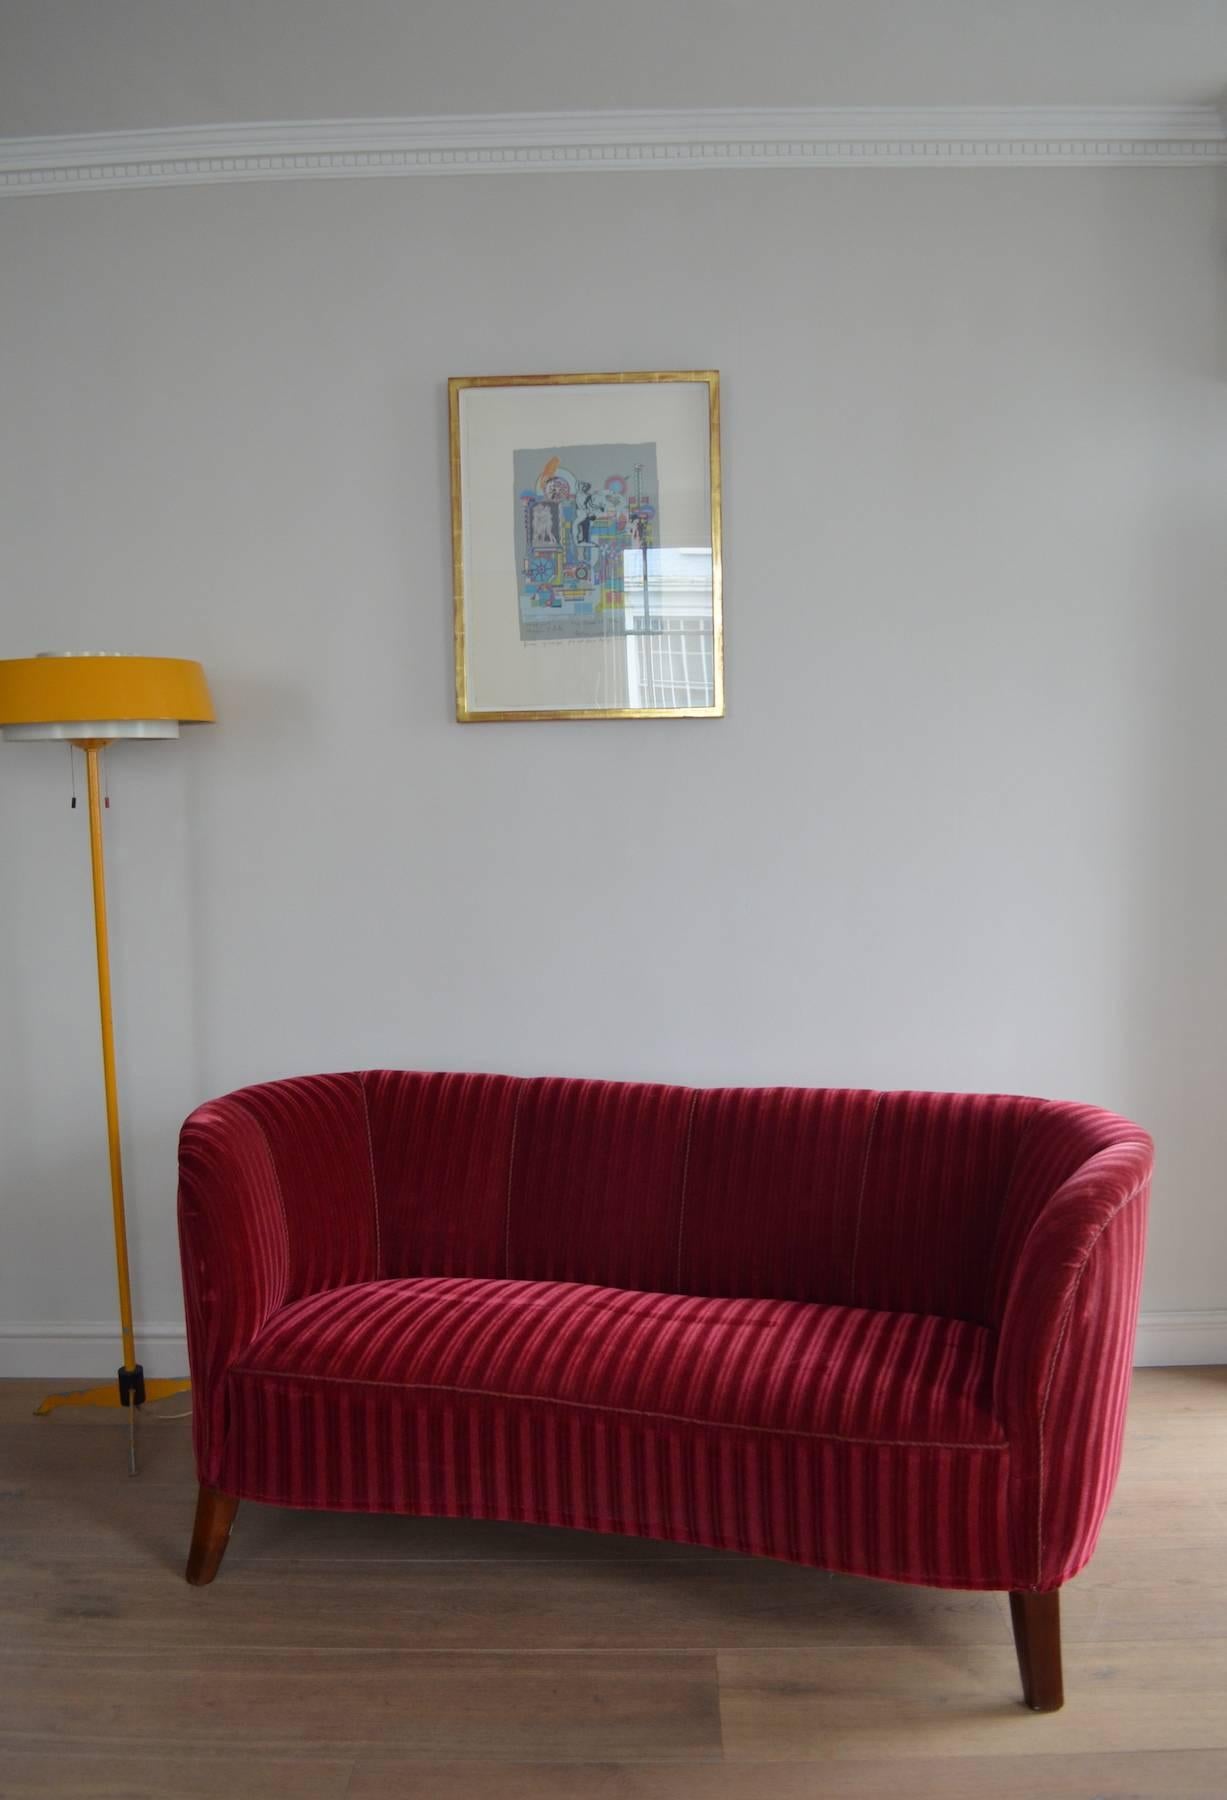 An Art Deco banana sofa with red striped velvet upholstery and piping.